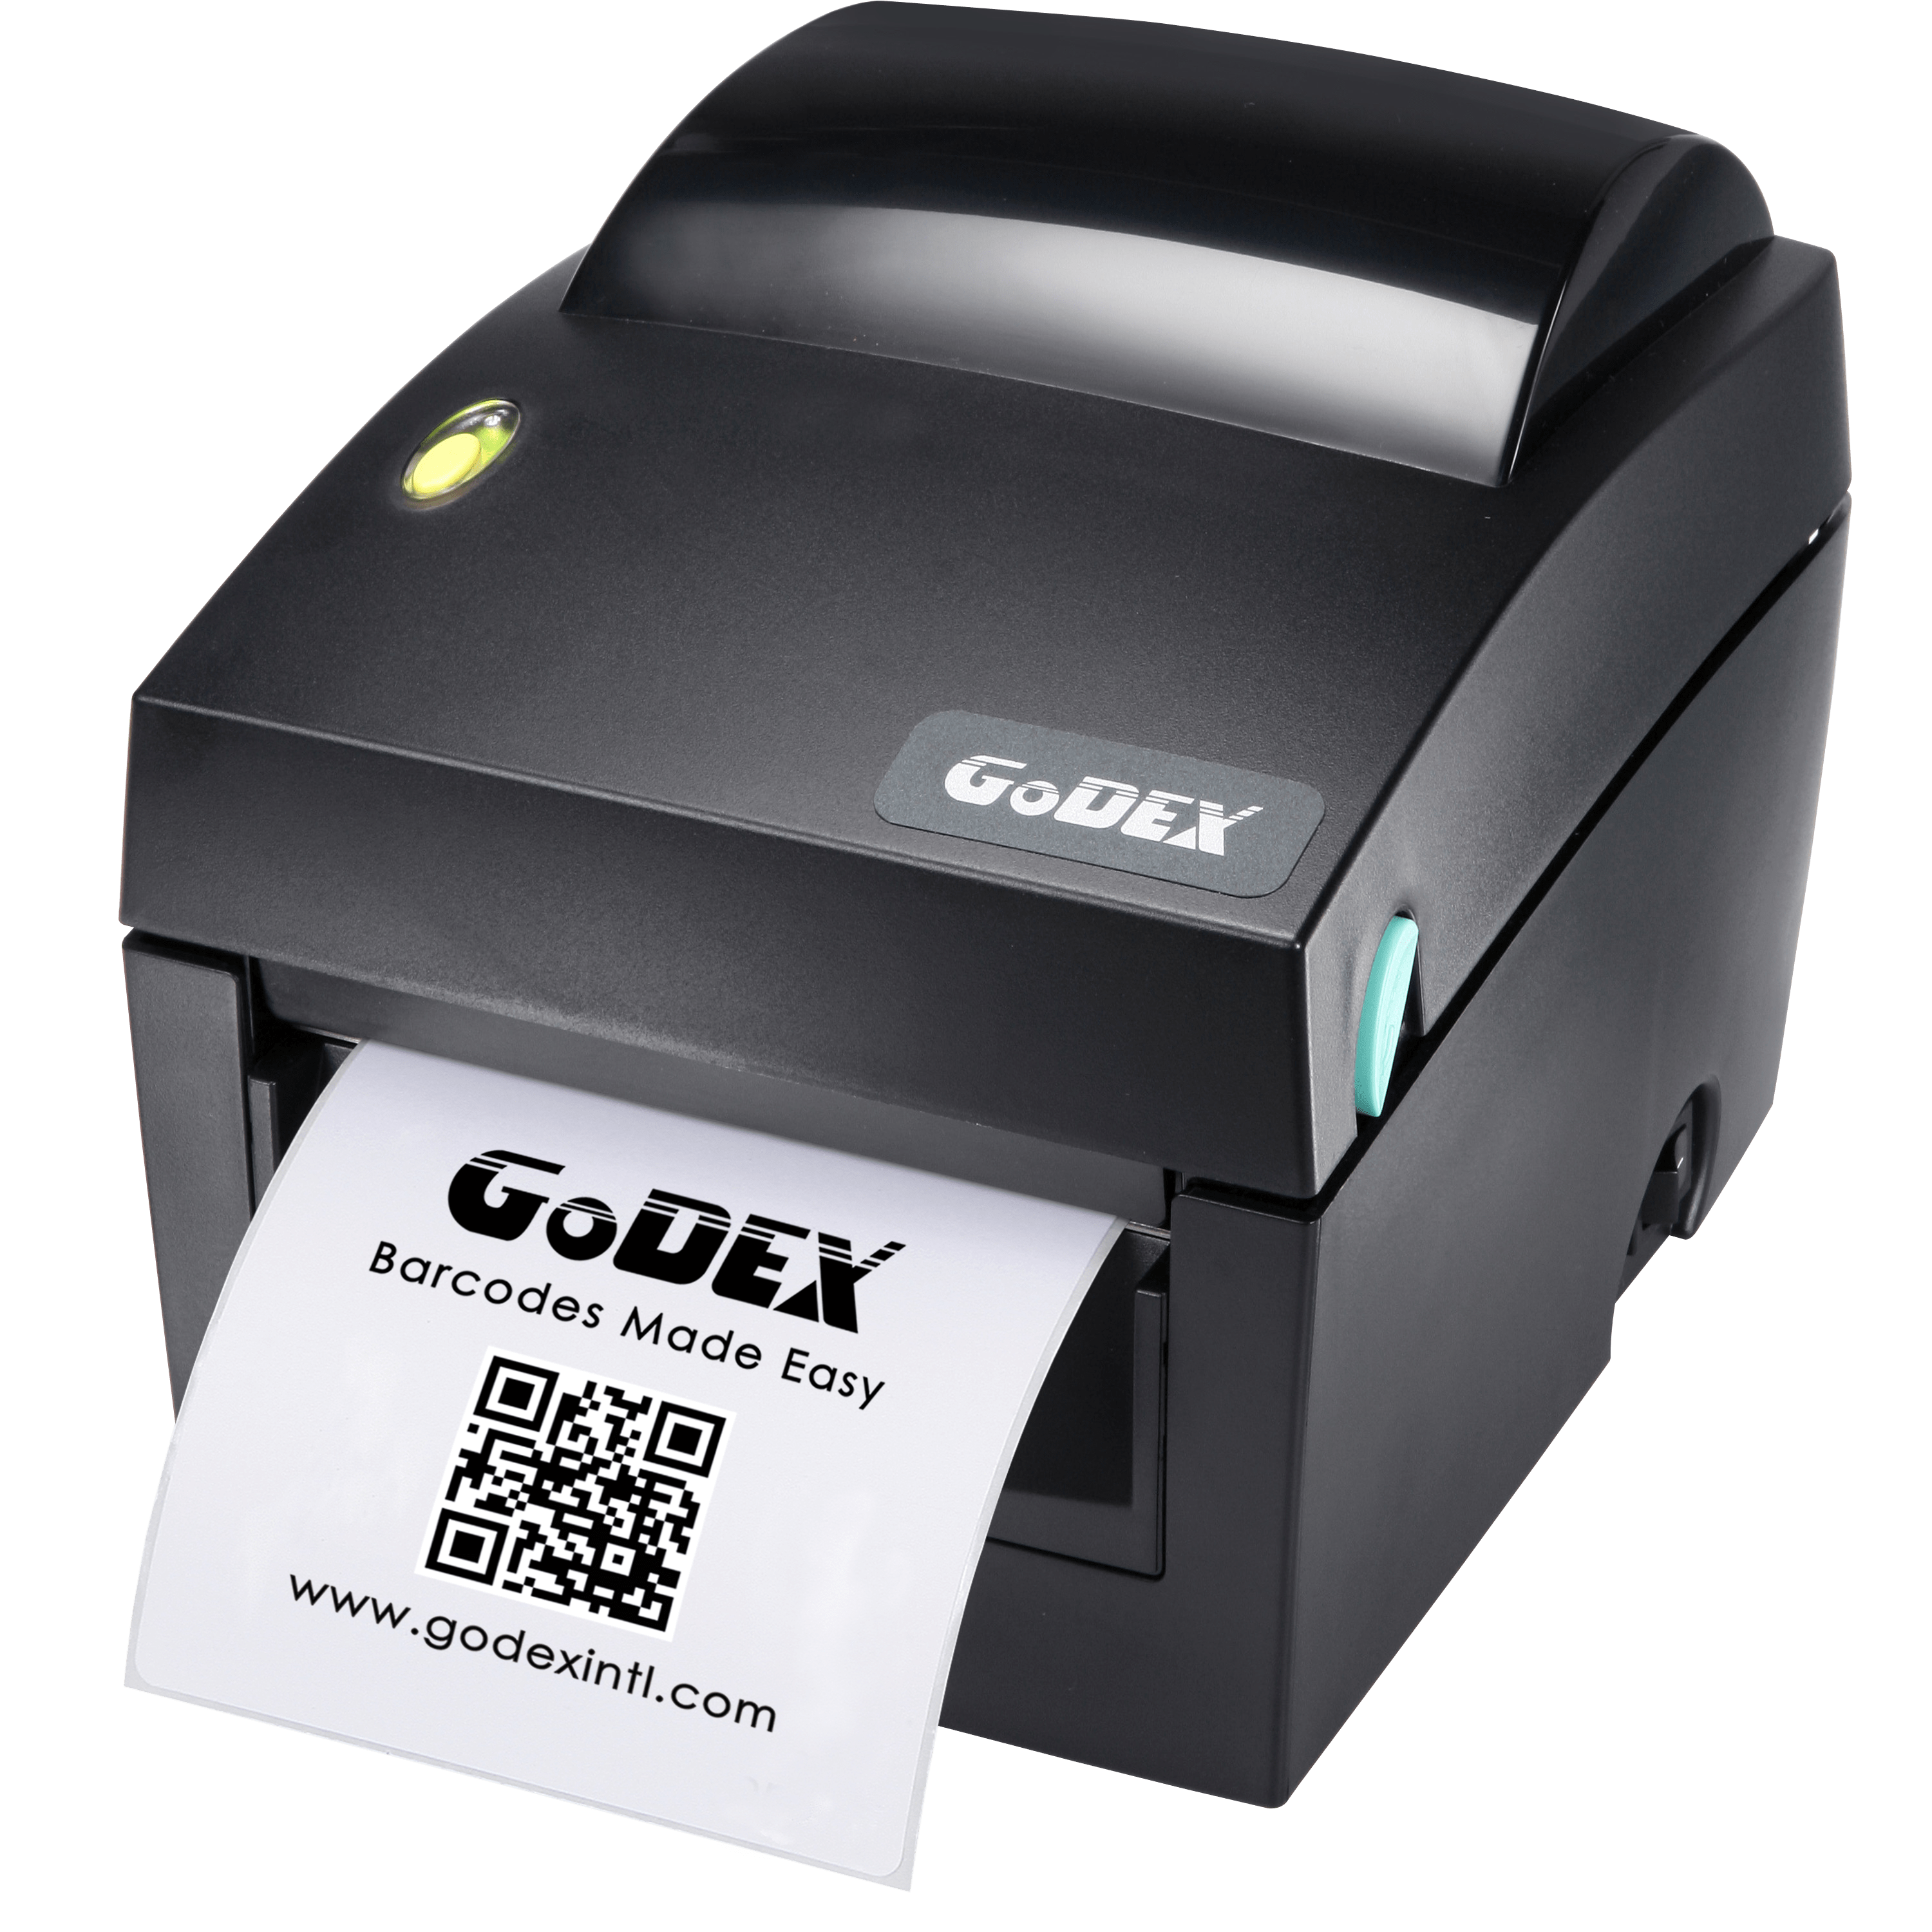 Featured image for “Godex DT4X”